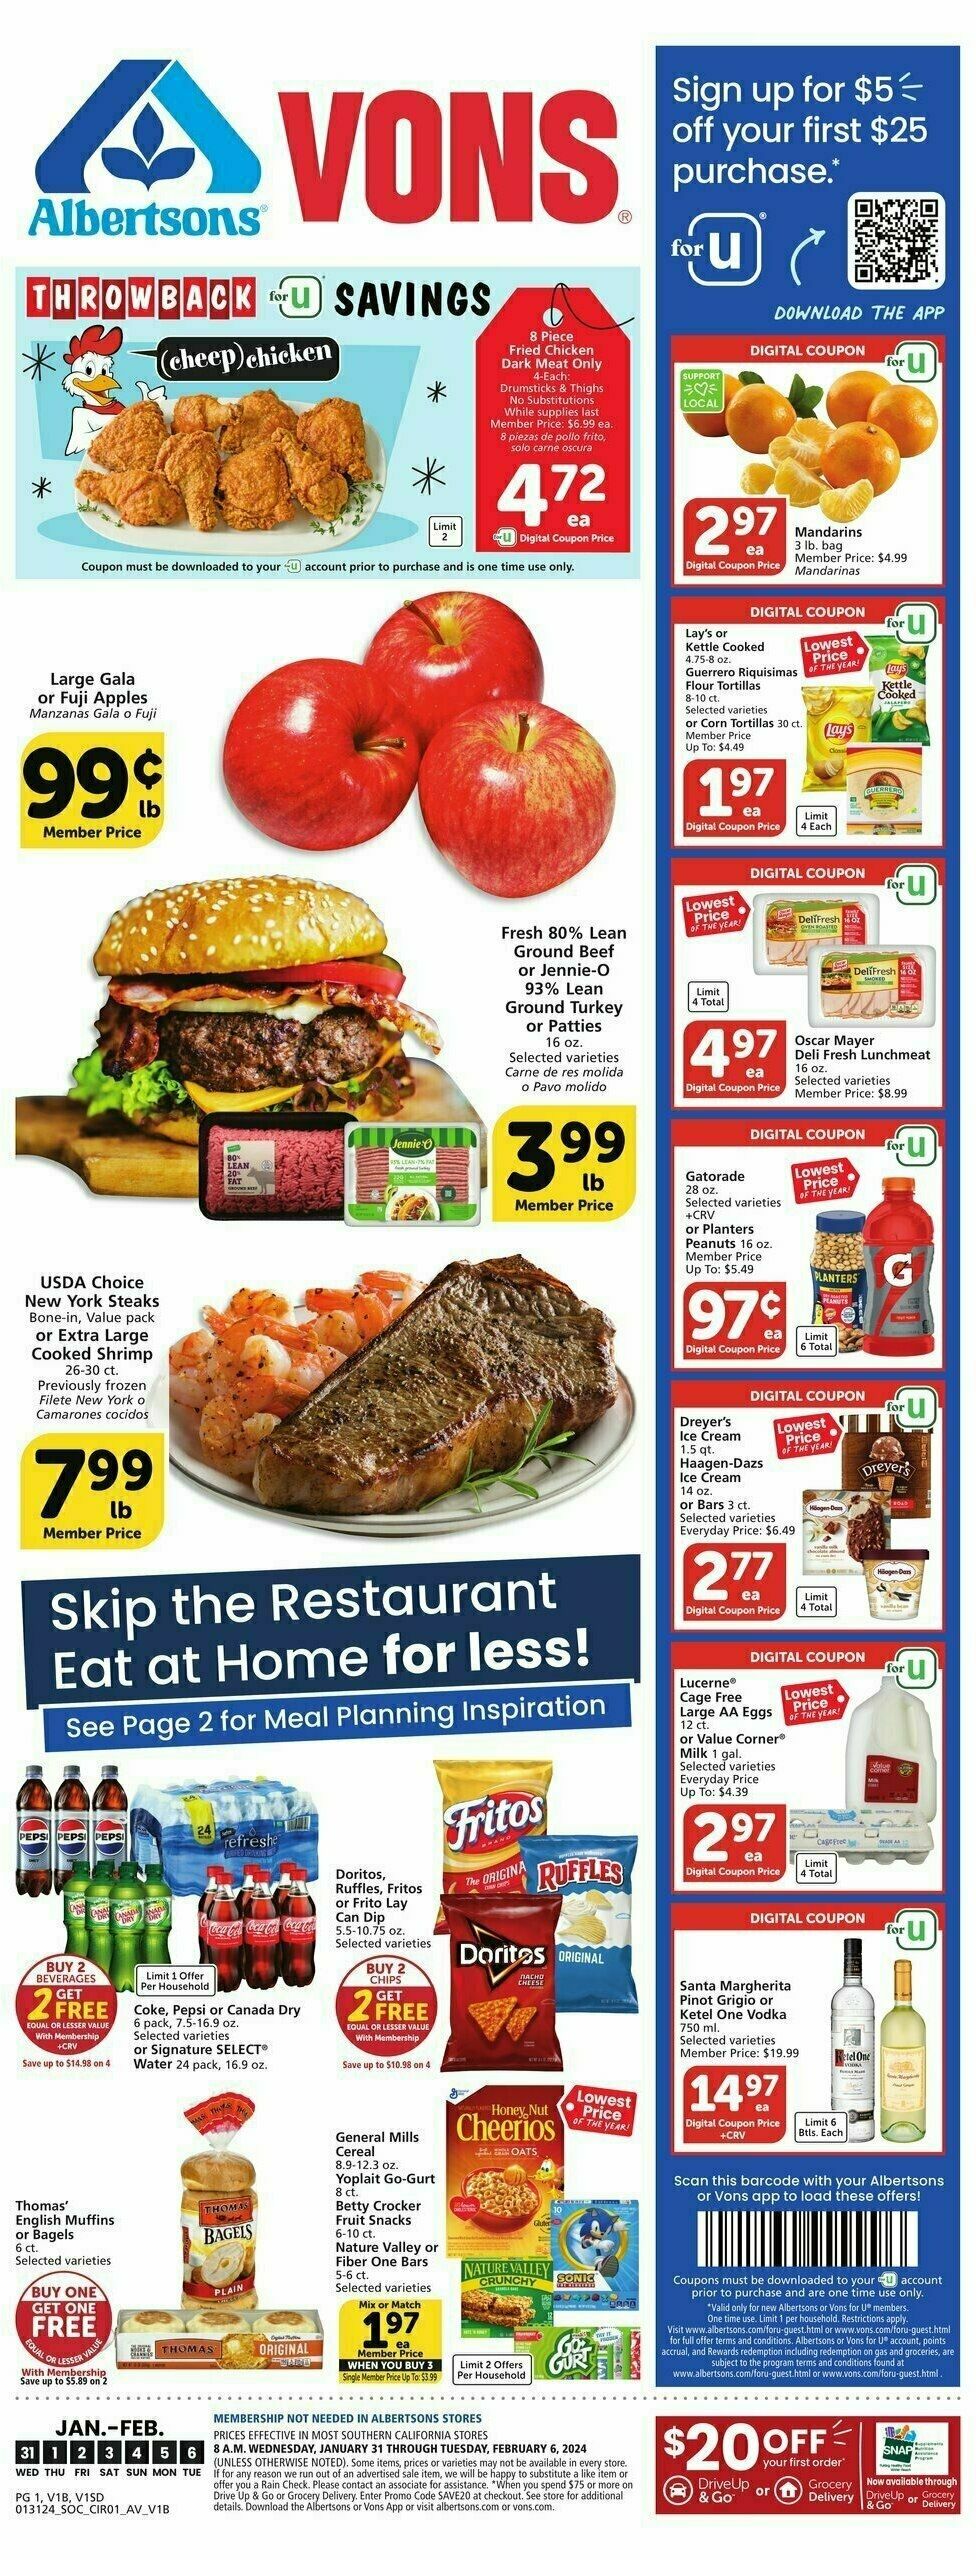 Vons Weekly Ad from January 31